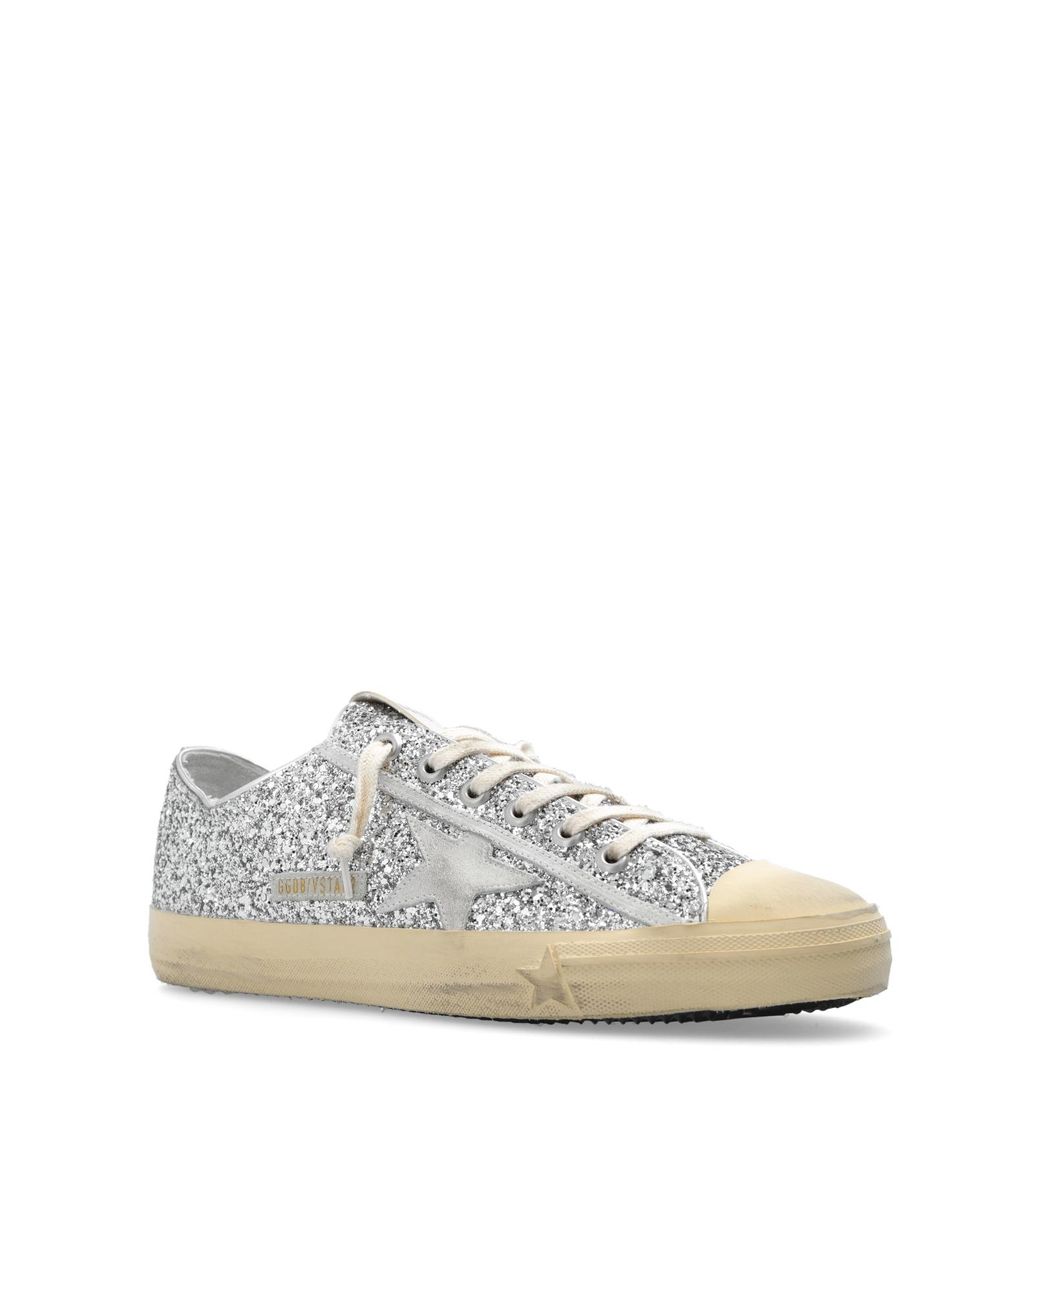 Women's Super-Star sneakers with gold foxing